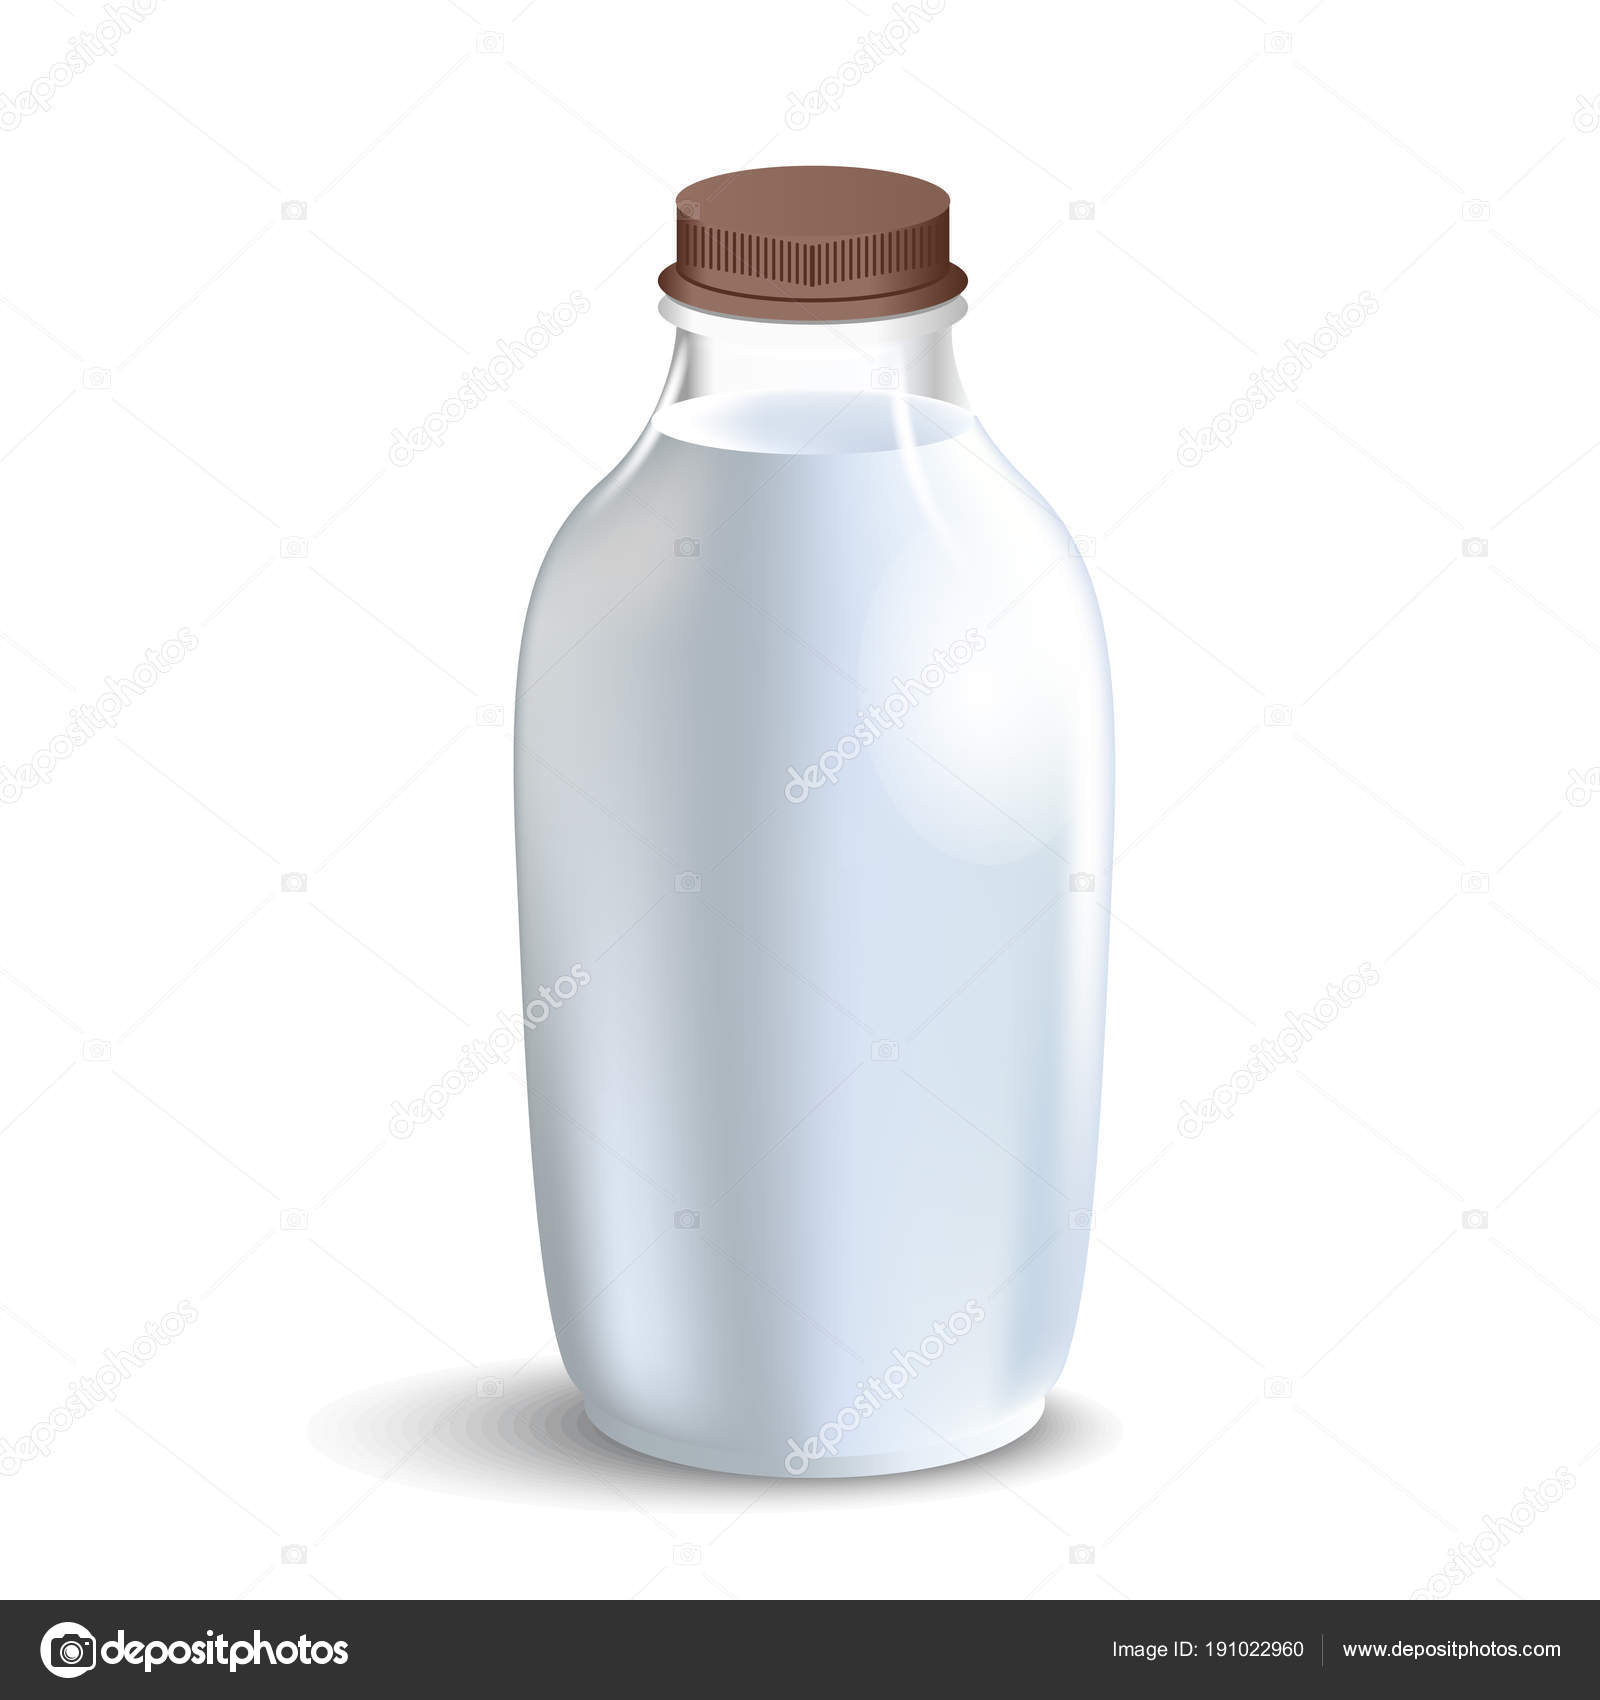 Download White Glossy Plastic Bottle With Screw Cap For Dairy Products Milk Drink Yogurt Cream Dessert Realistic Packaging Mockup Template Front View Vector Illustration Vector Image By C Mariaaverburg Vector Stock 191022960